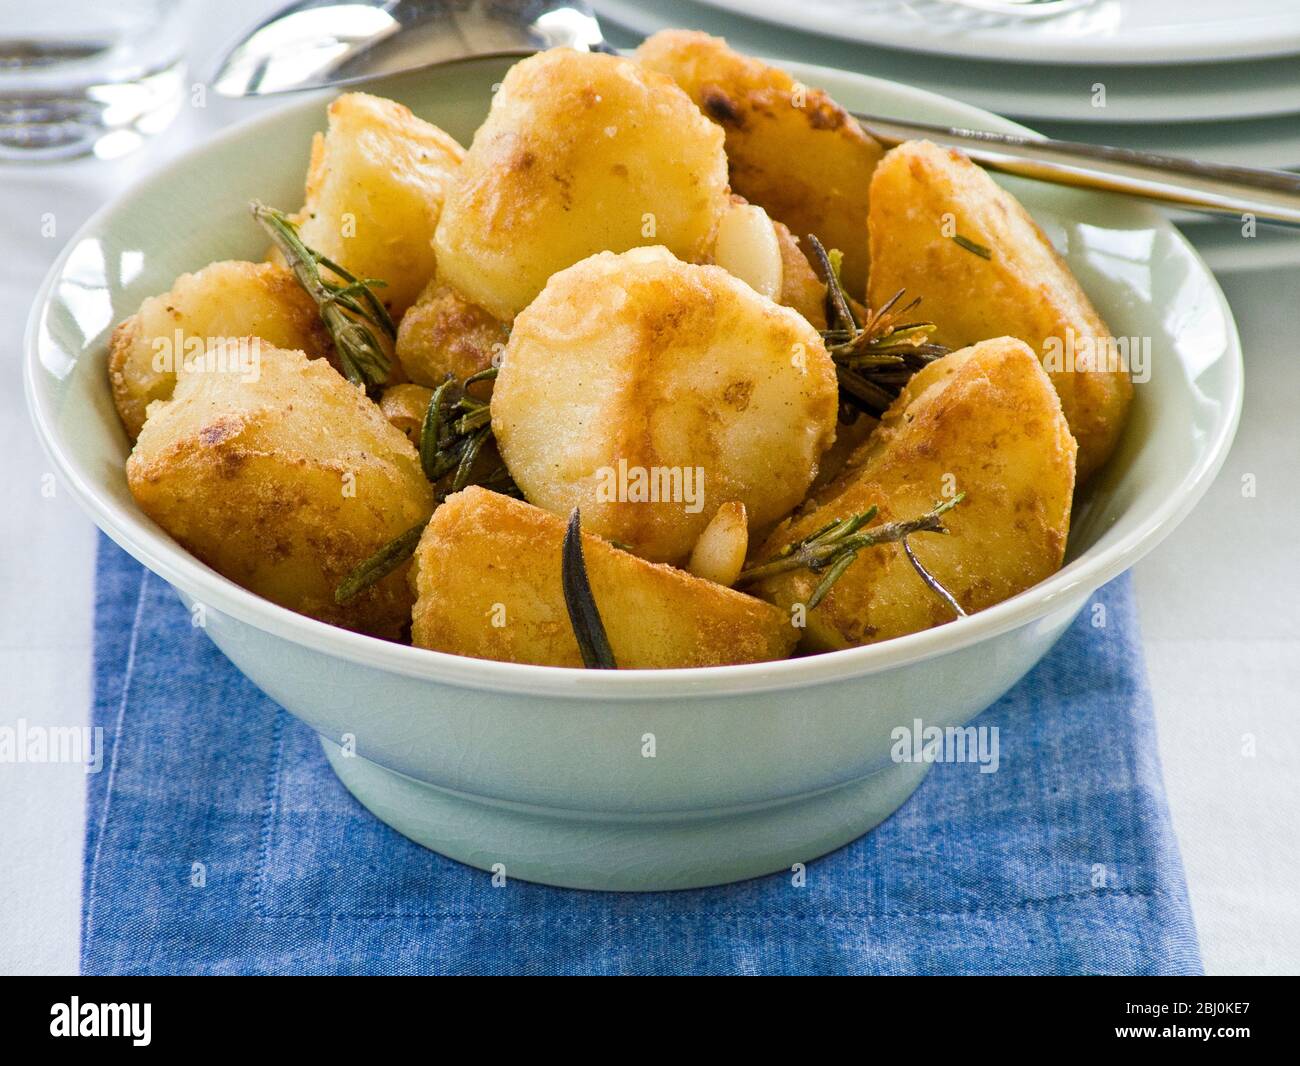 Roast potatoes with rosemary in green bowl - Stock Photo